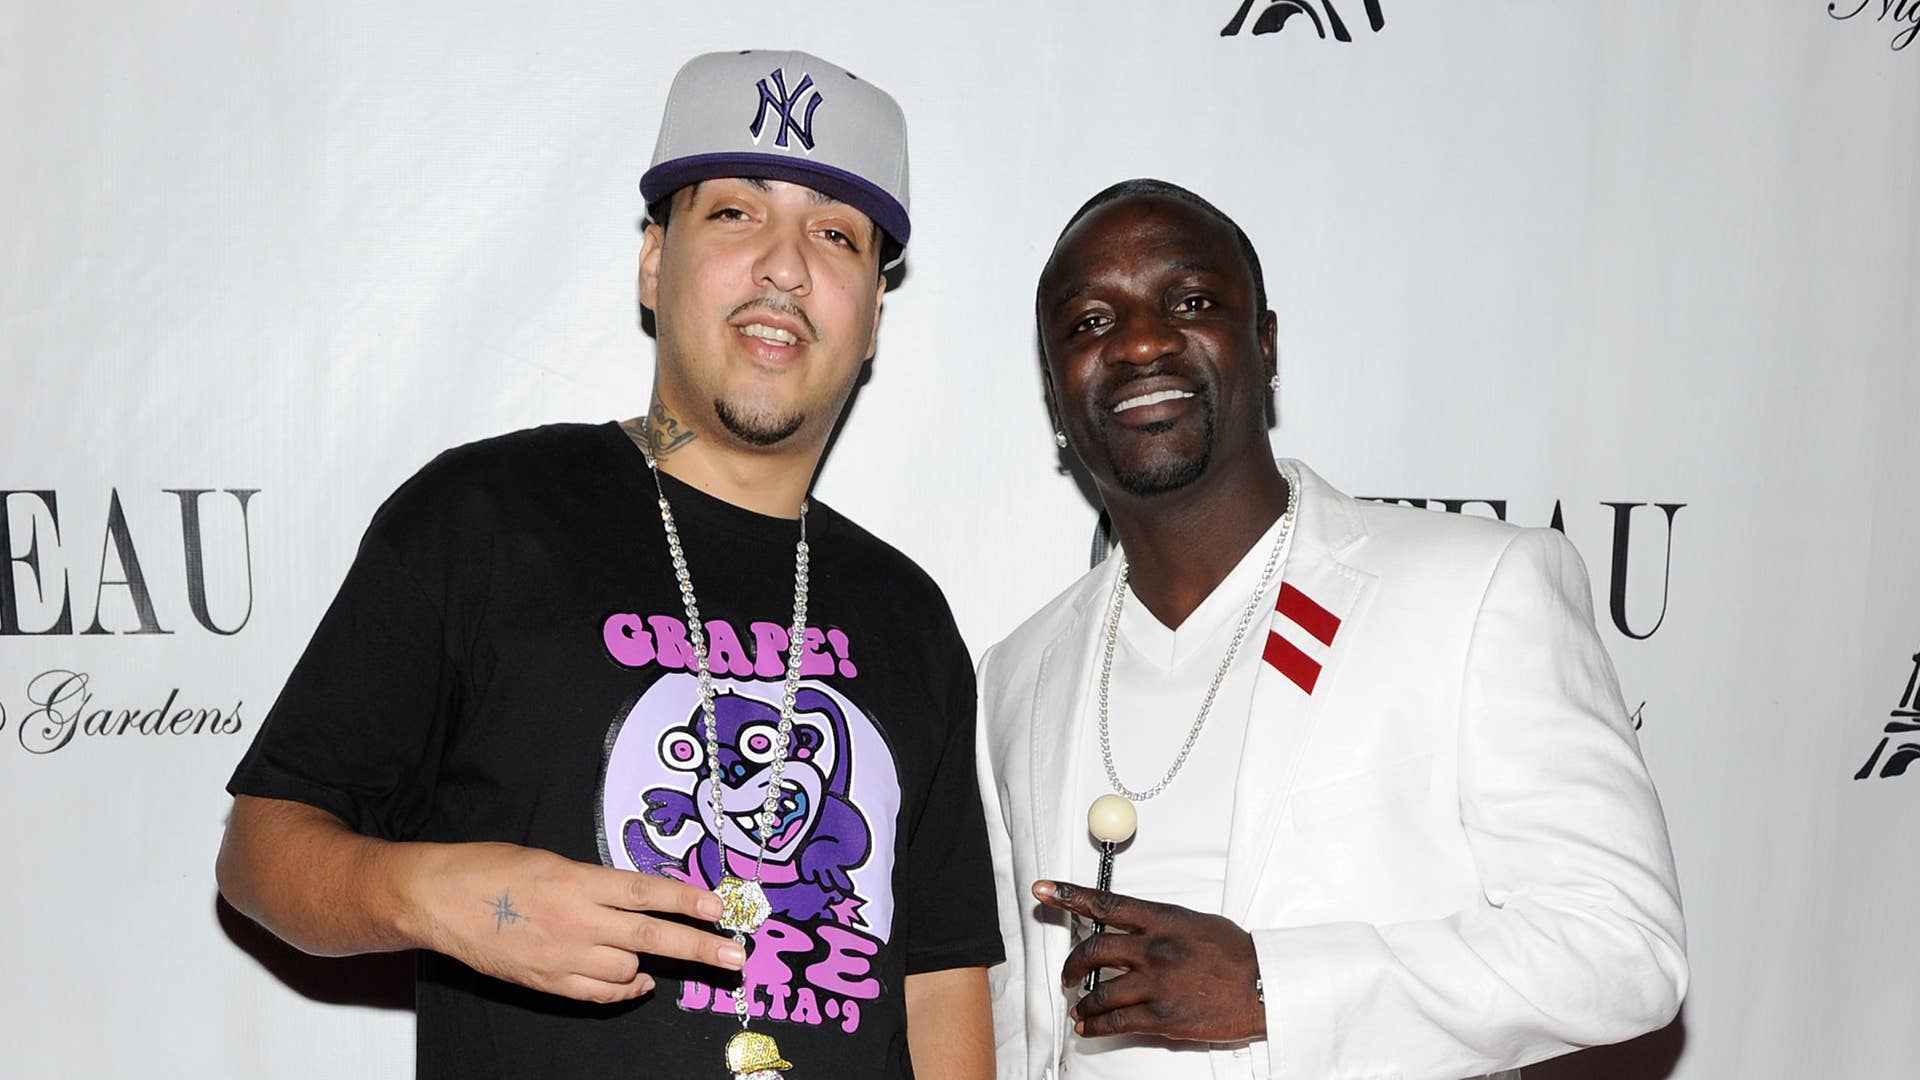 Recording artists French Montana and Akon arrive at the Chateau Nightclub & Gardens